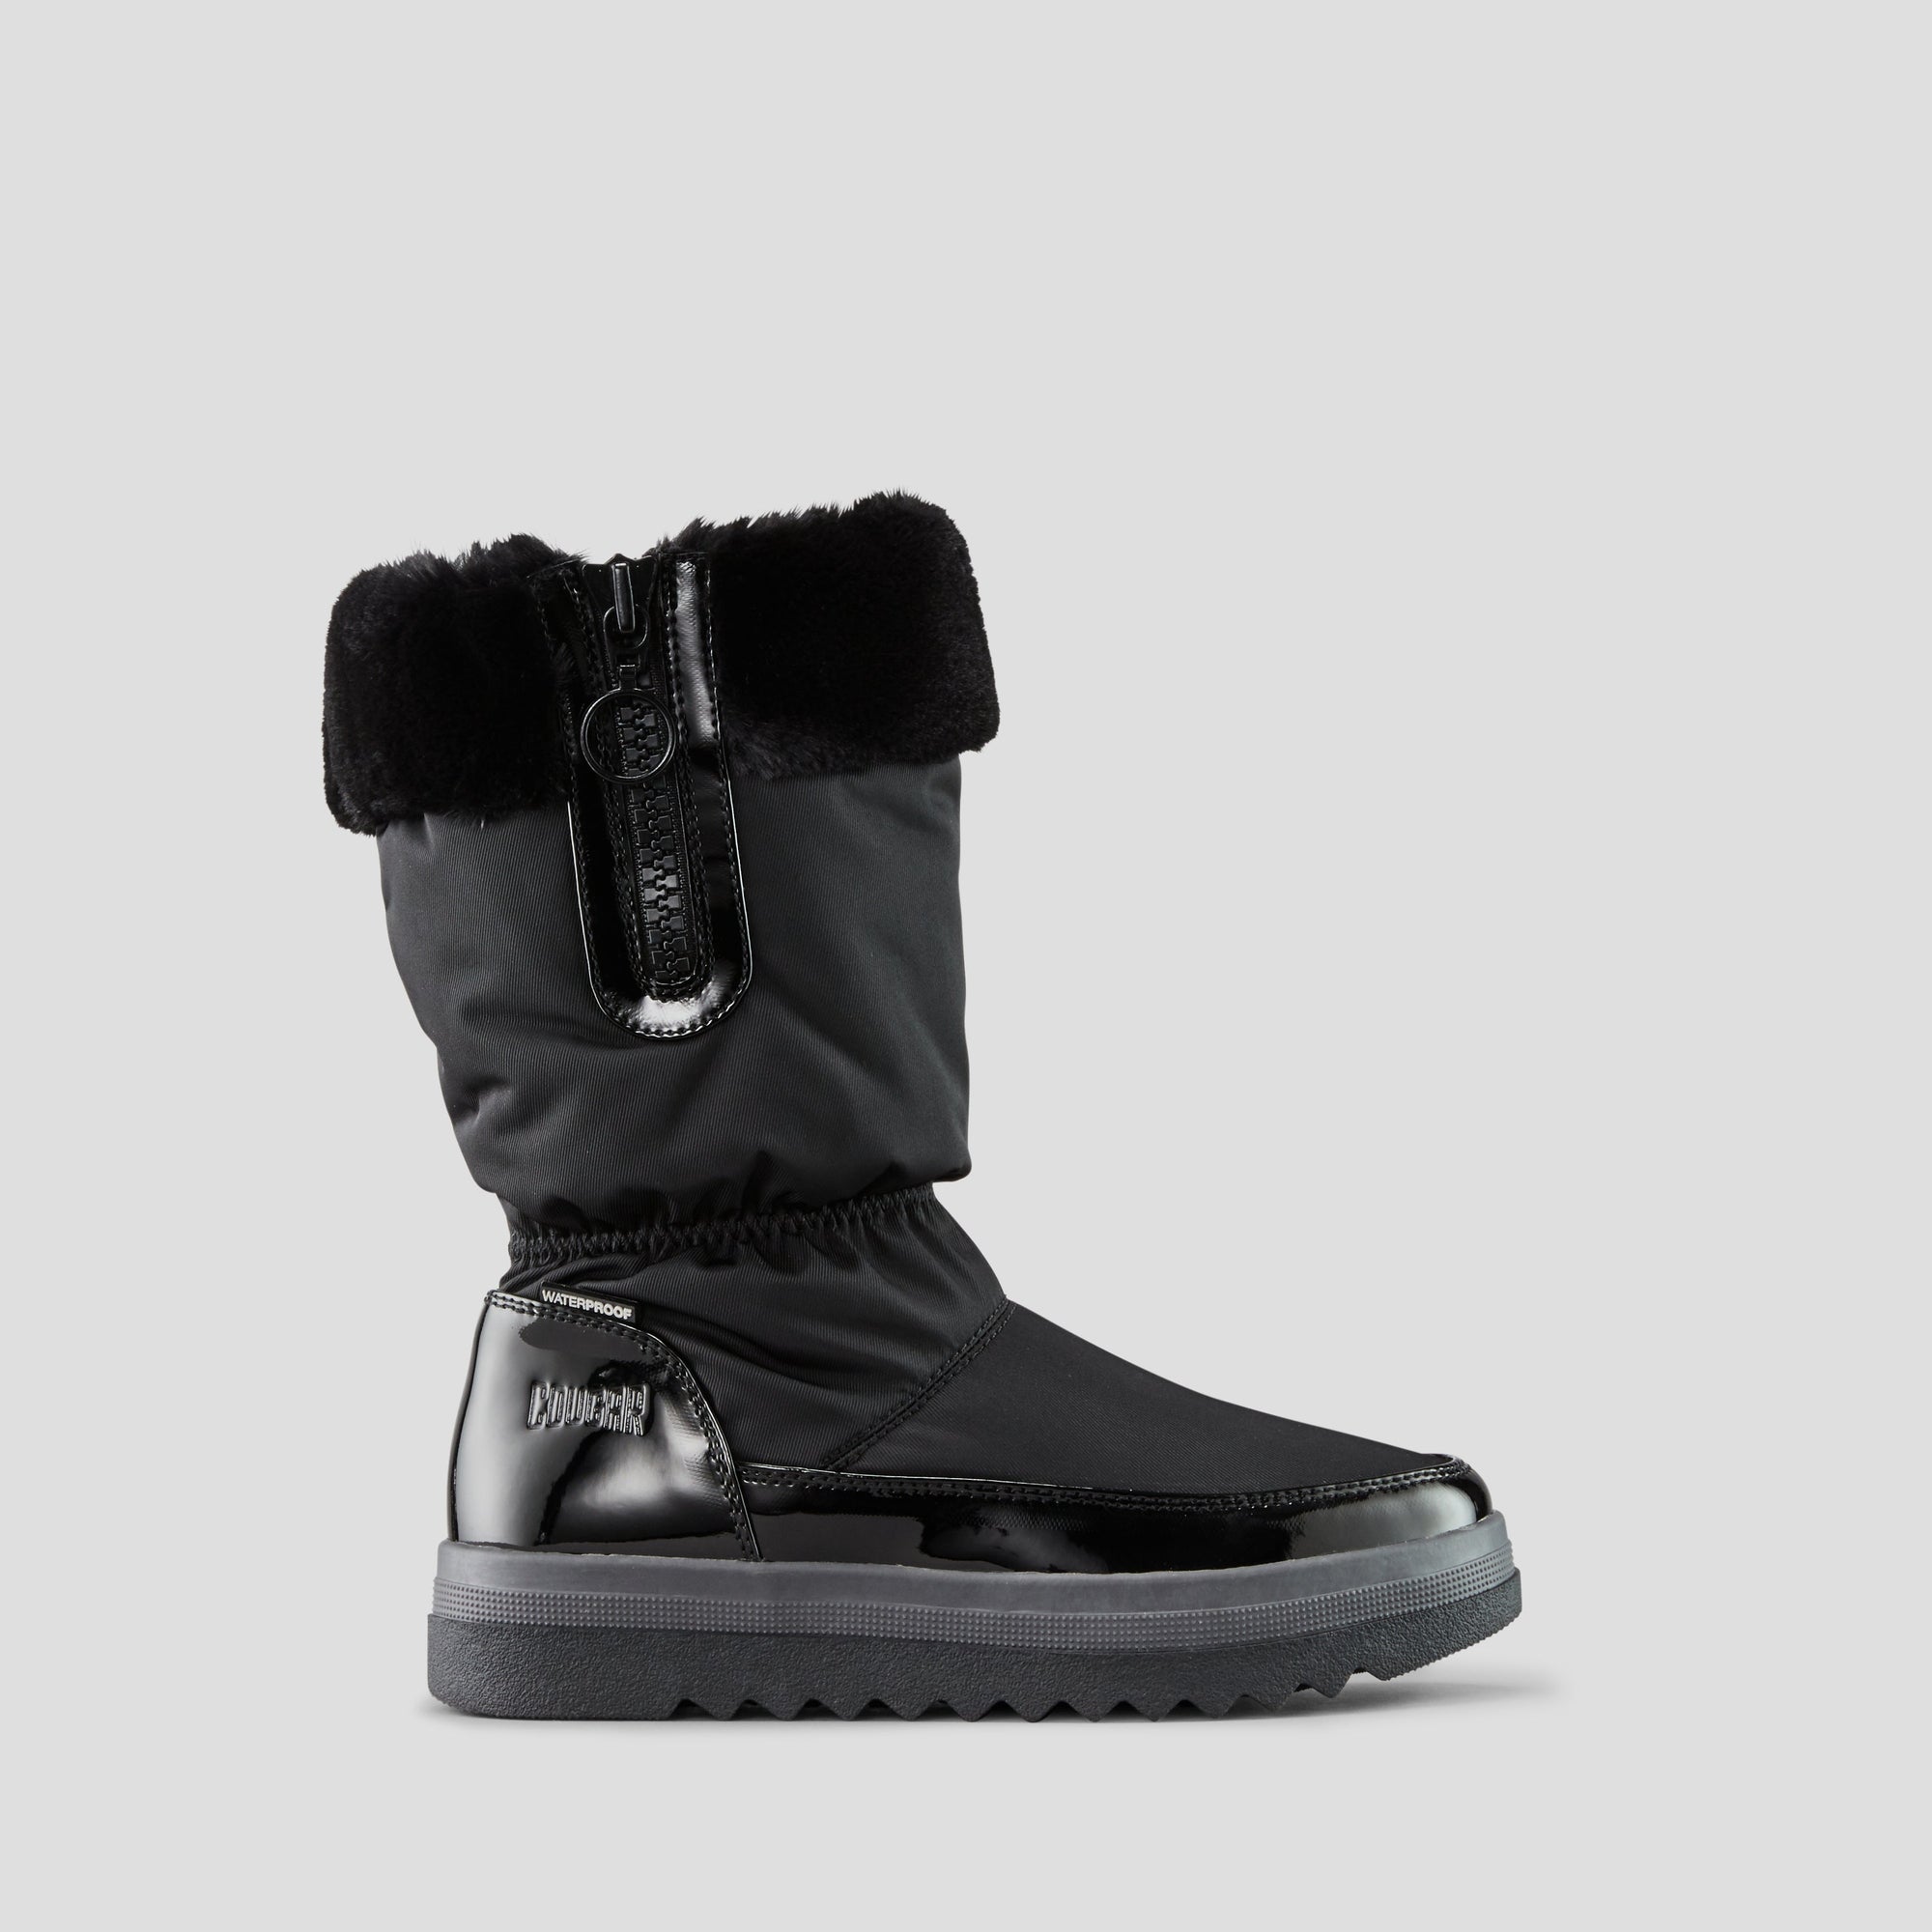 Merry Patent Waterproof Winter Boot (Youth) - Colour Black